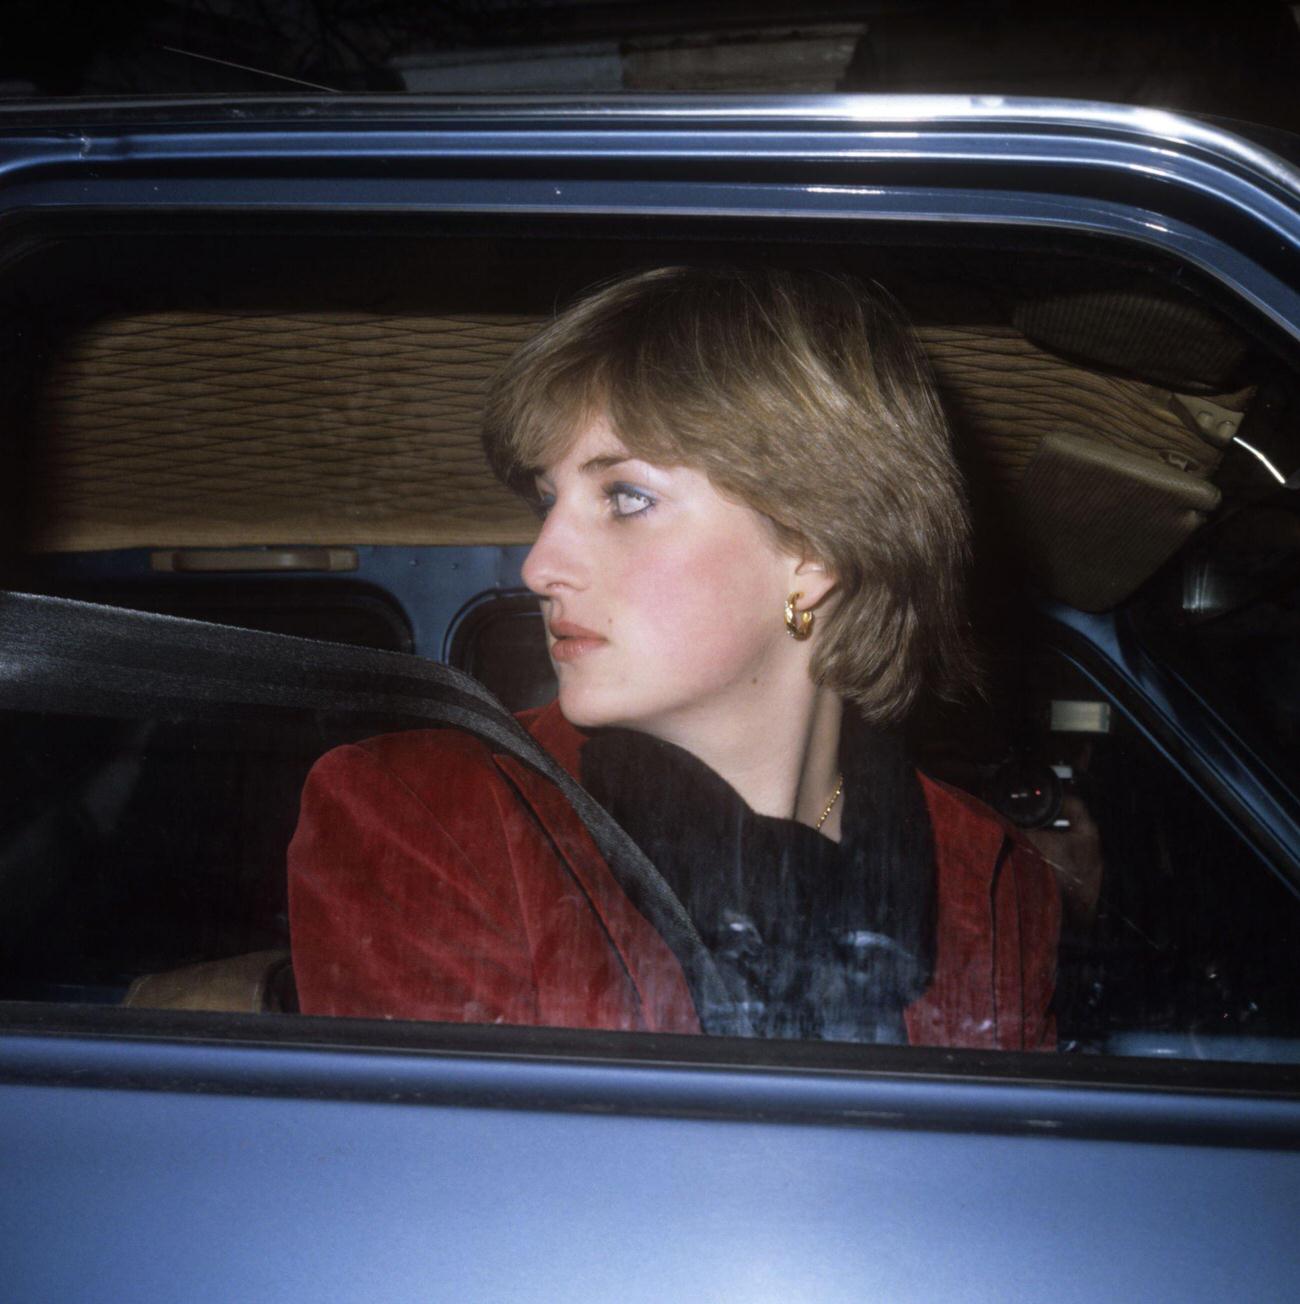 Lady Diana Spencer who has been linked romantically with the Prince of Wales, leaves her London flat in her car after being pursued by the media.